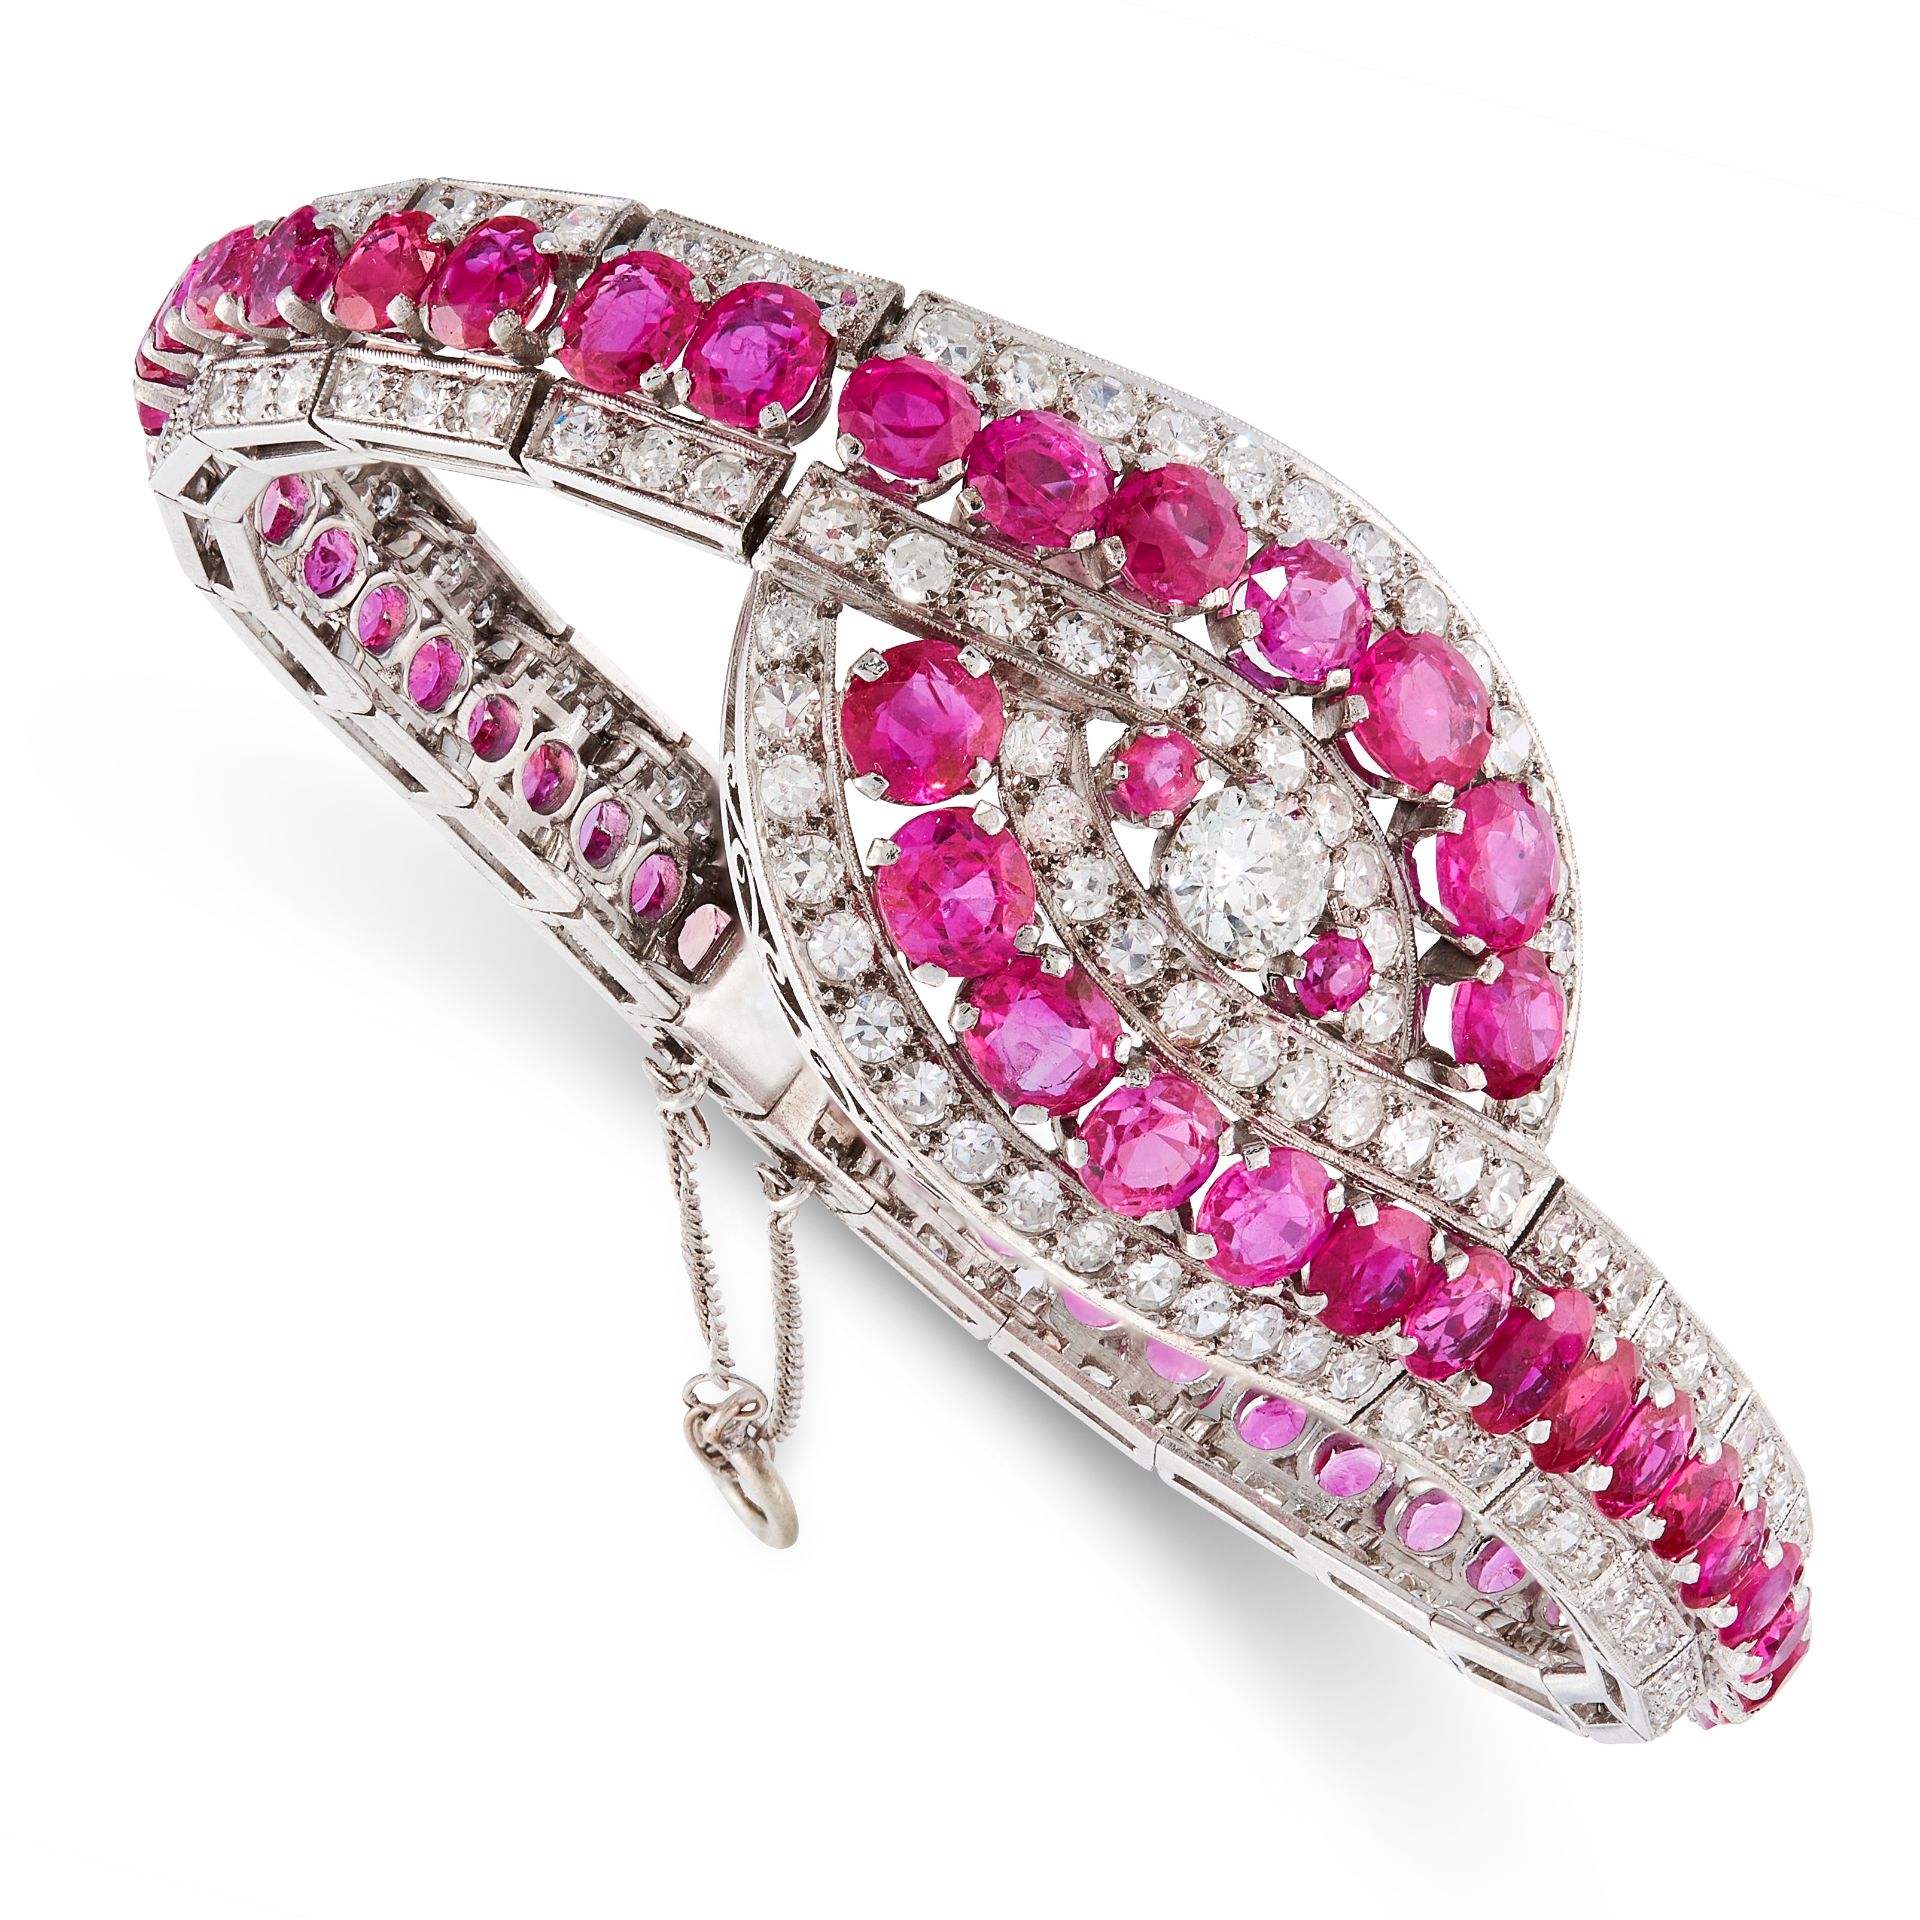 AN EXCEPTIONAL BURMA NO HEAT RUBY AND DIAMOND BRACELET set with a central round cut diamond within